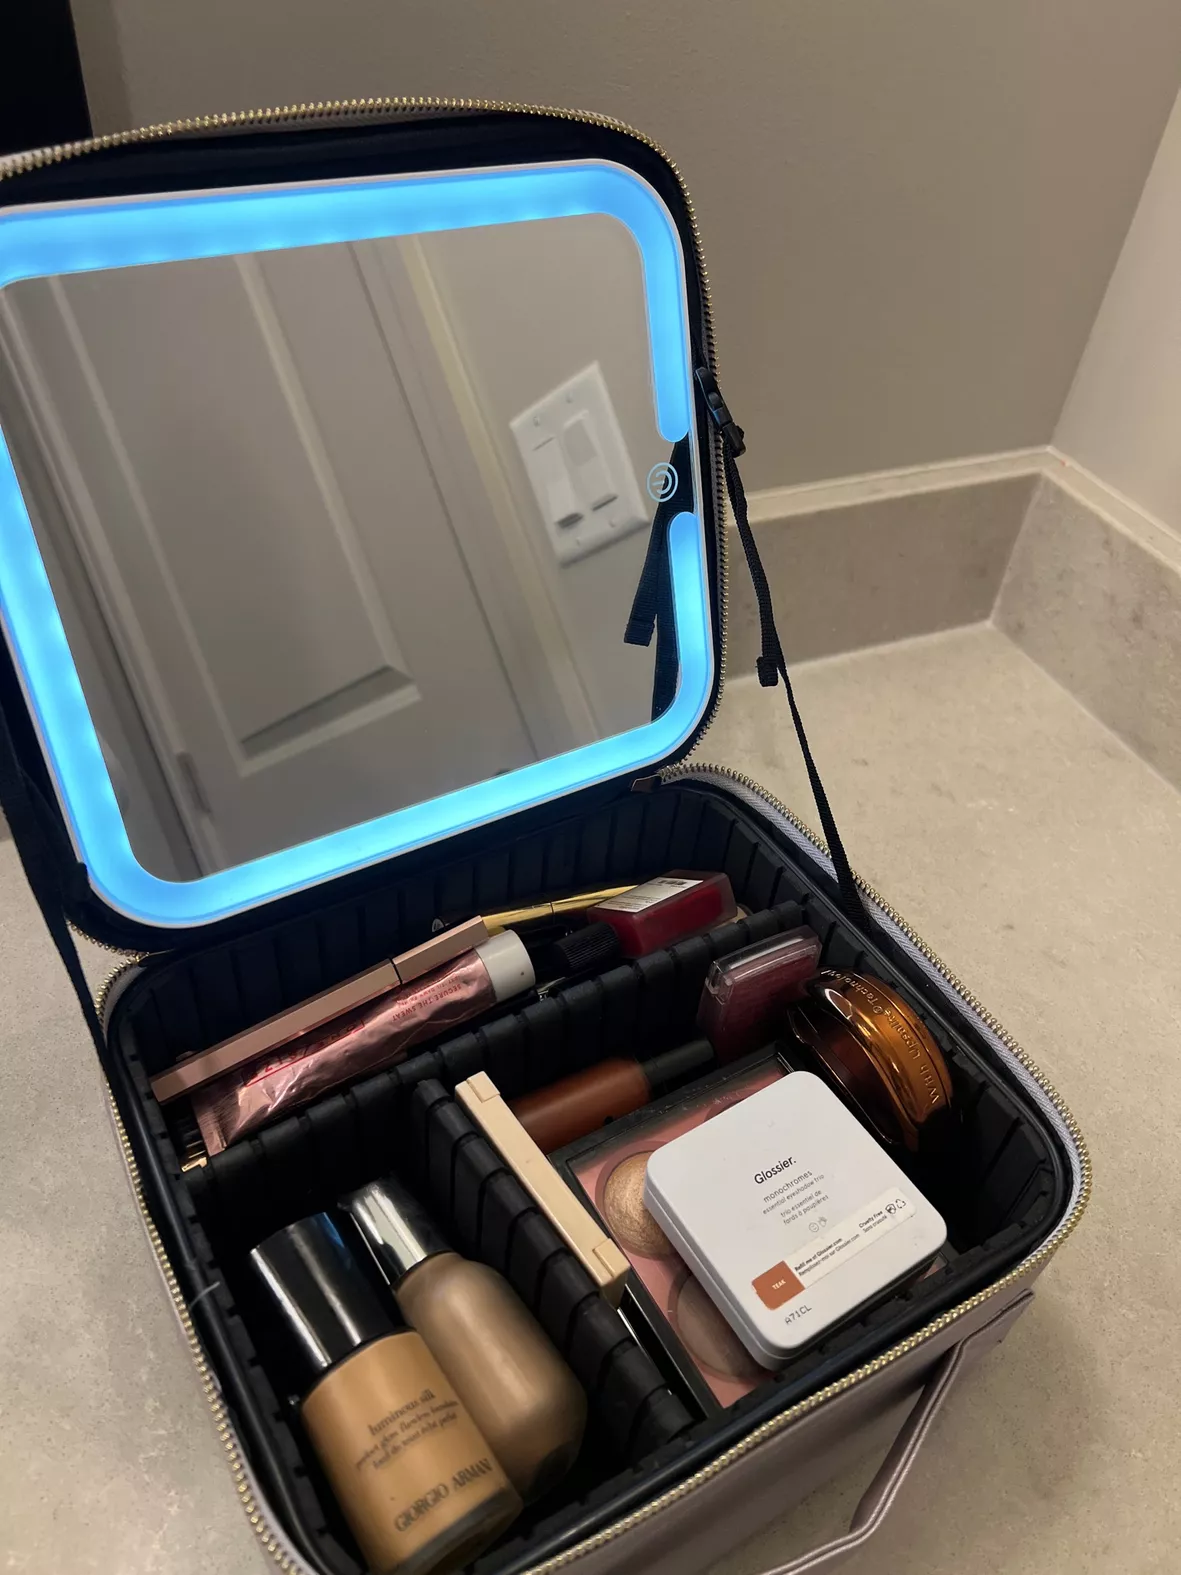 MOMIRA Travel Makeup Case with Large Lighted Mirror Partitionable